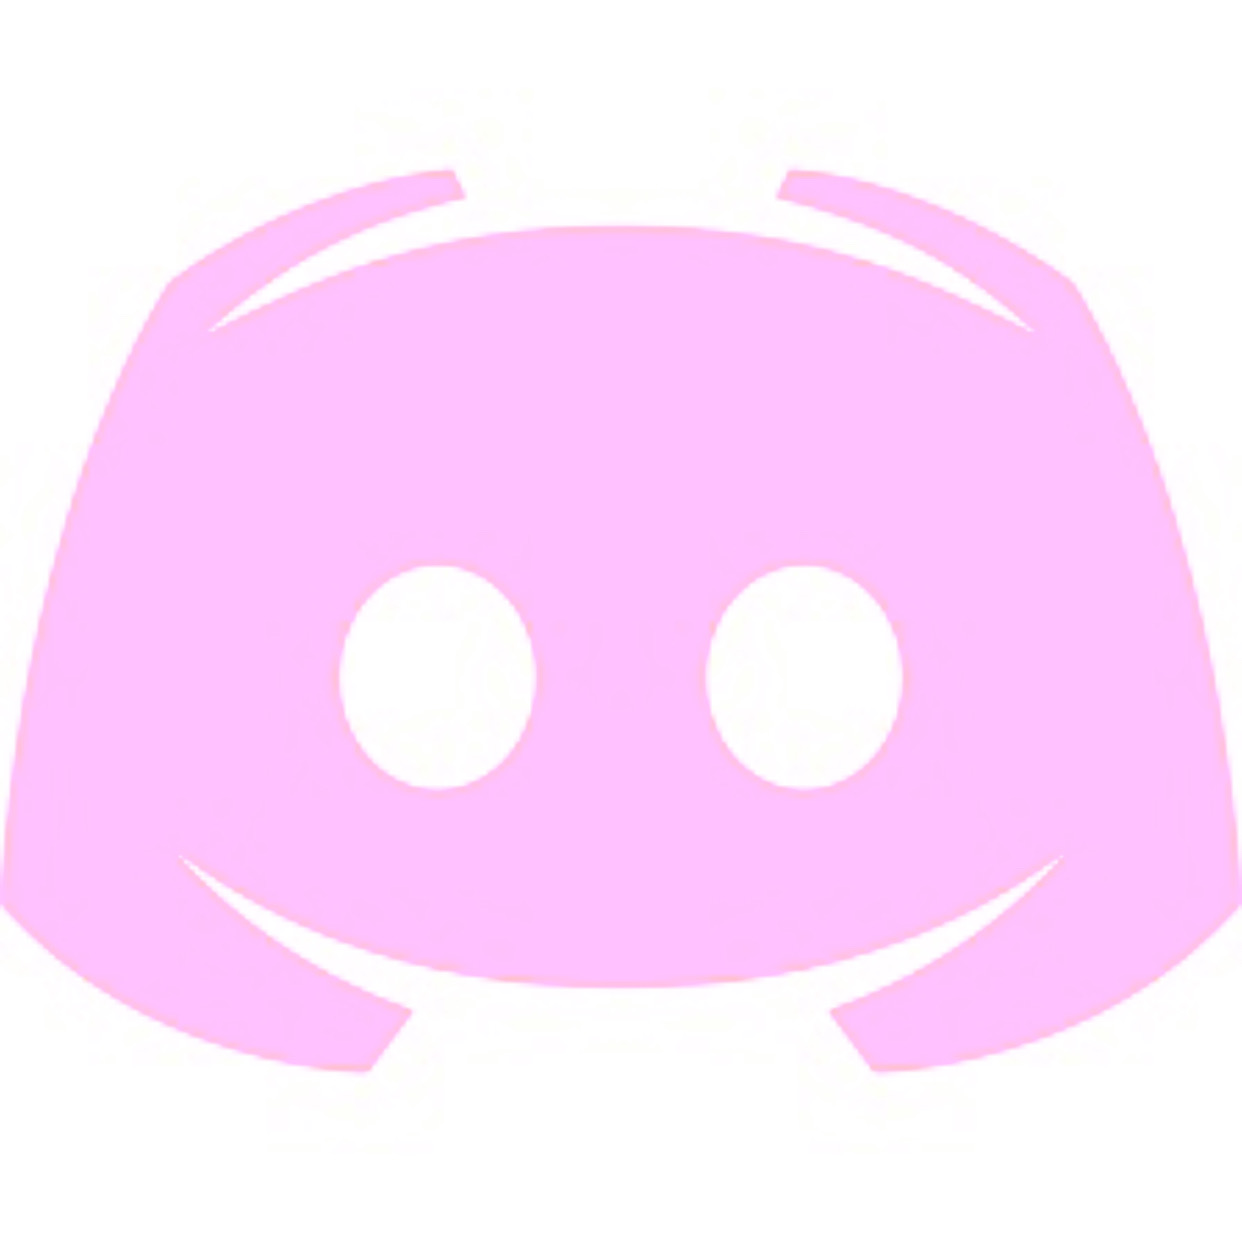 This visual is about freetoedit discord aesthetic logo #freetoedit #discord #...